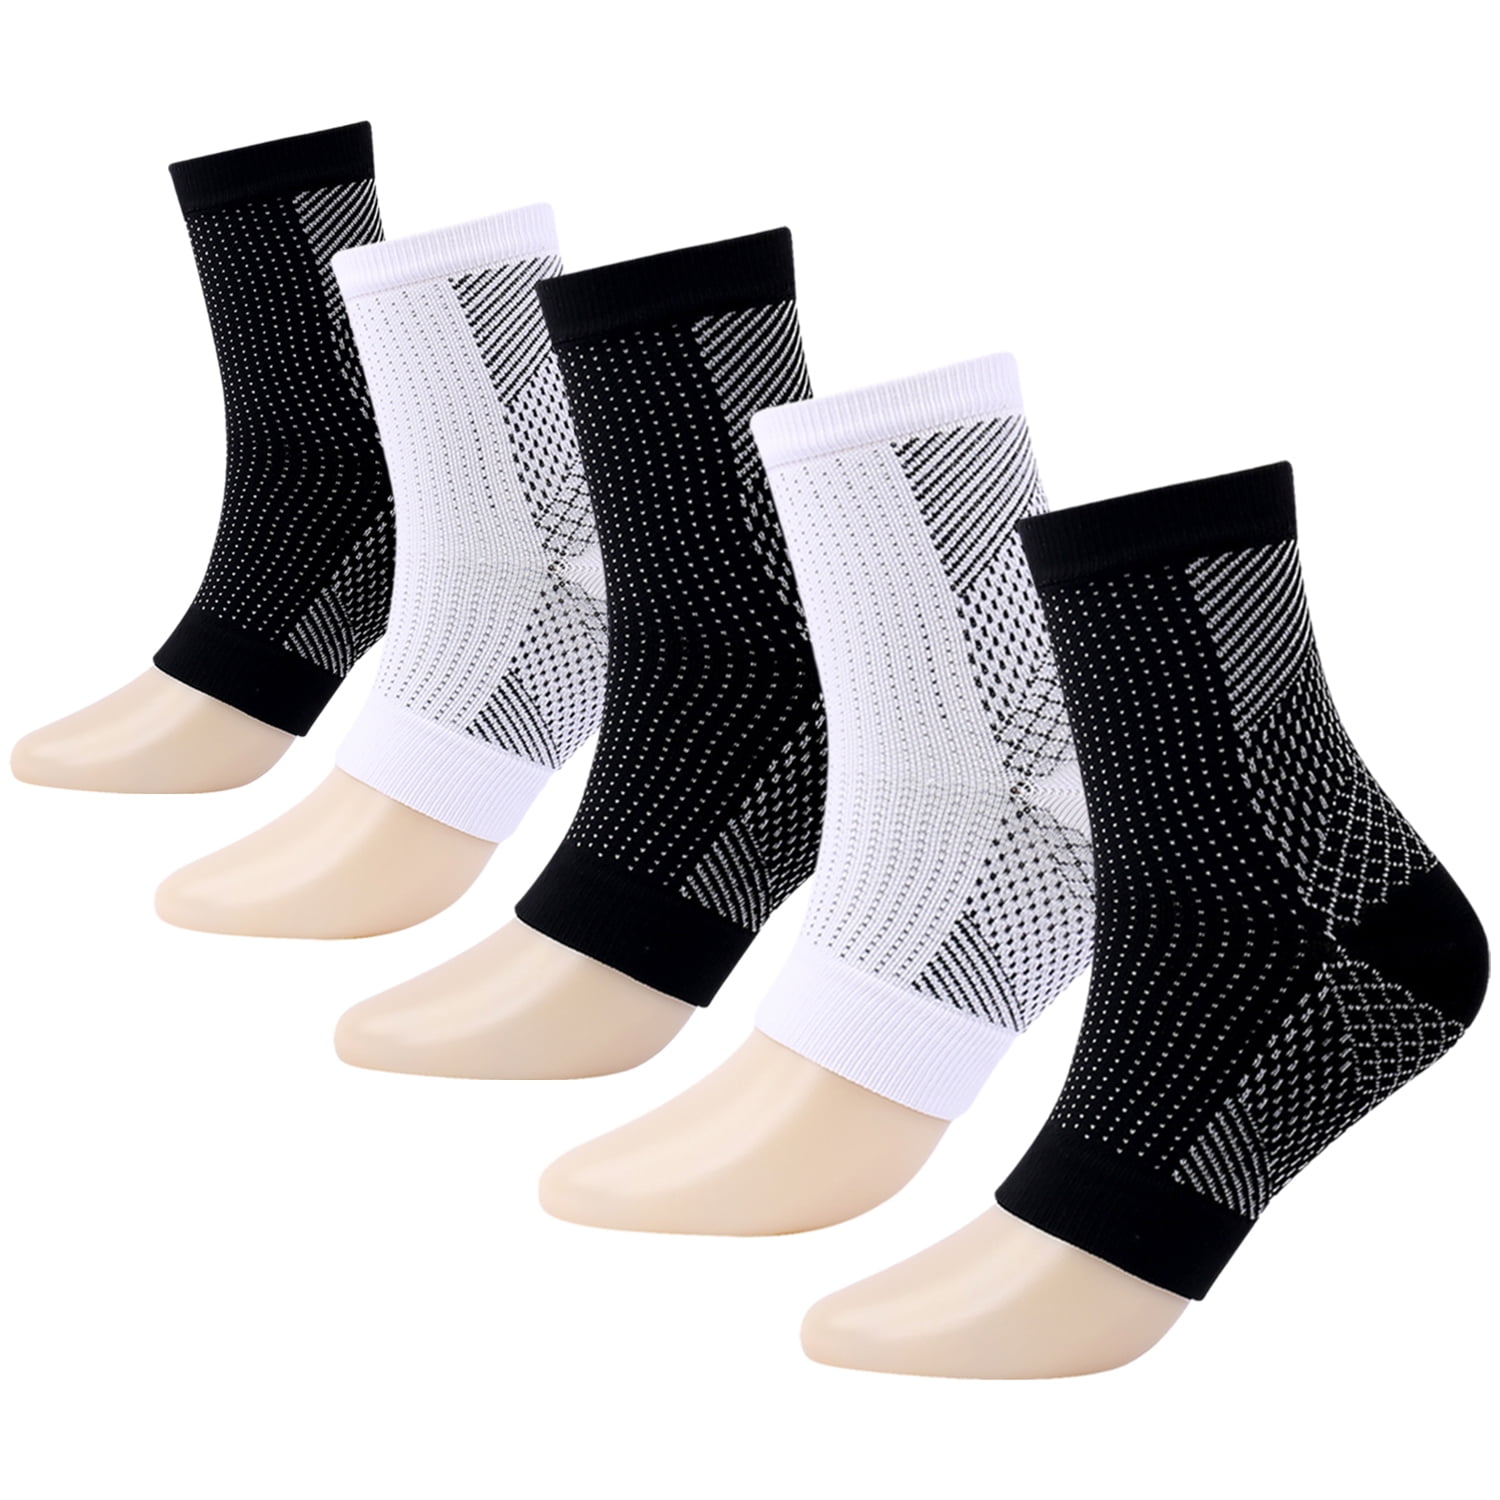 5 Pairs Ankle Brace Compression Sleeves - 8-15 mmHg Open Toe ...